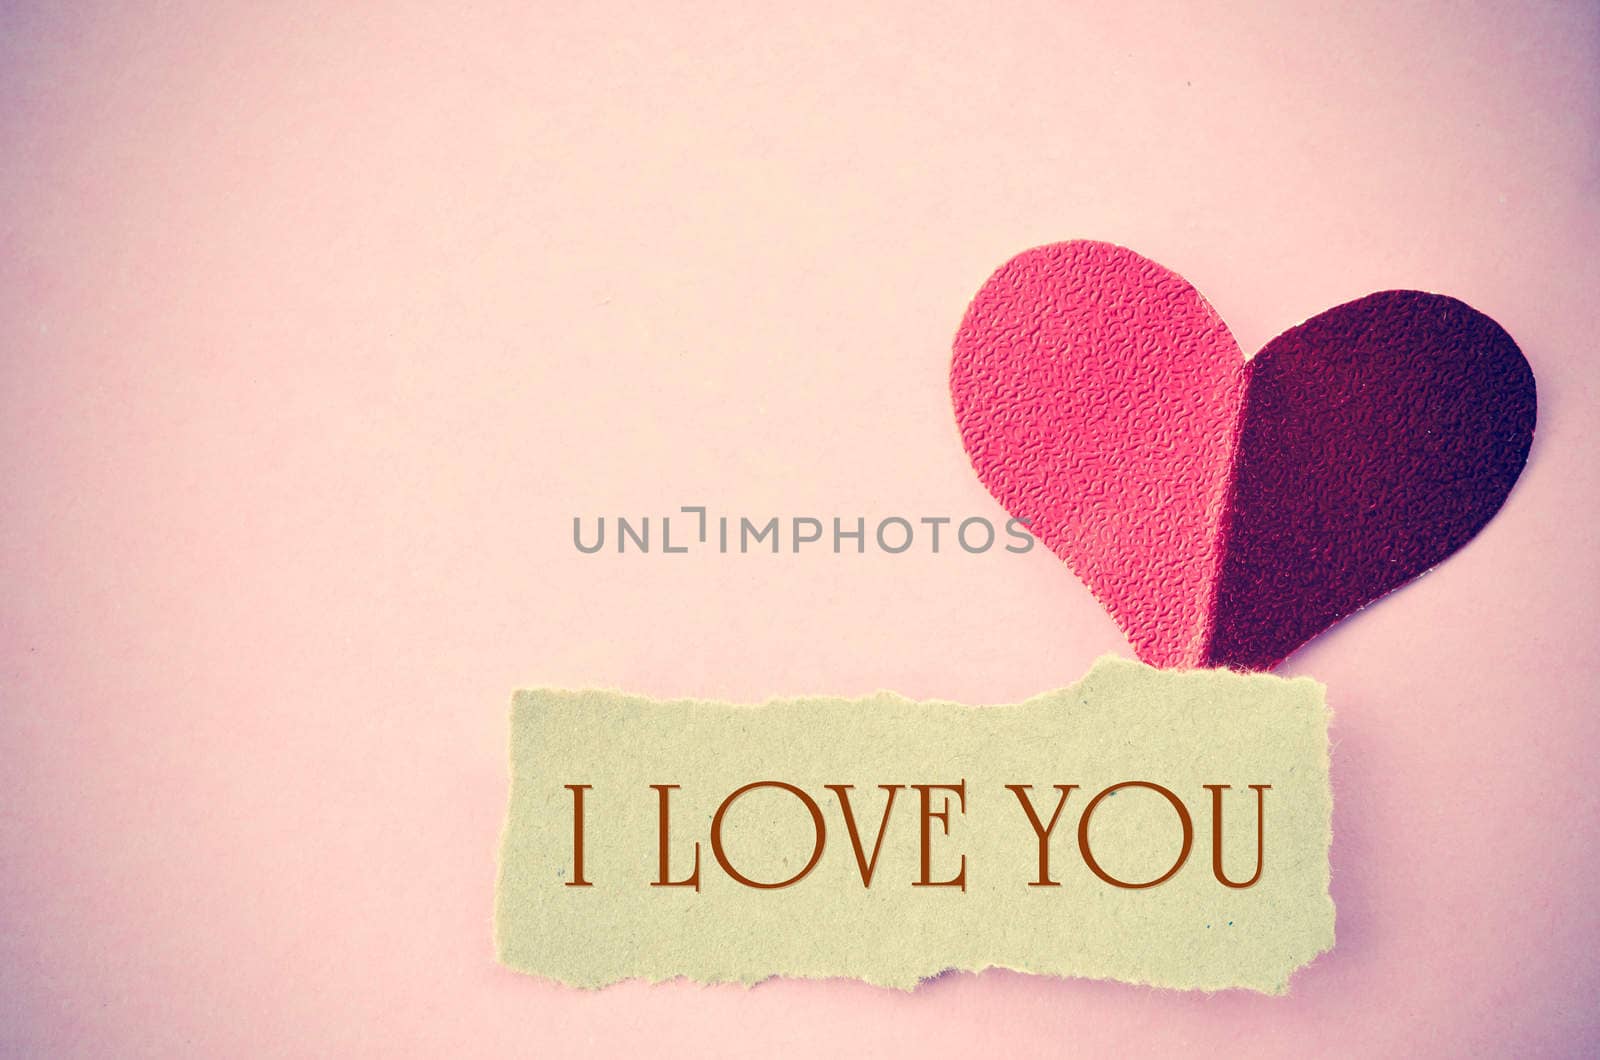 I love you message on vintage paper with copy space. Love concept.